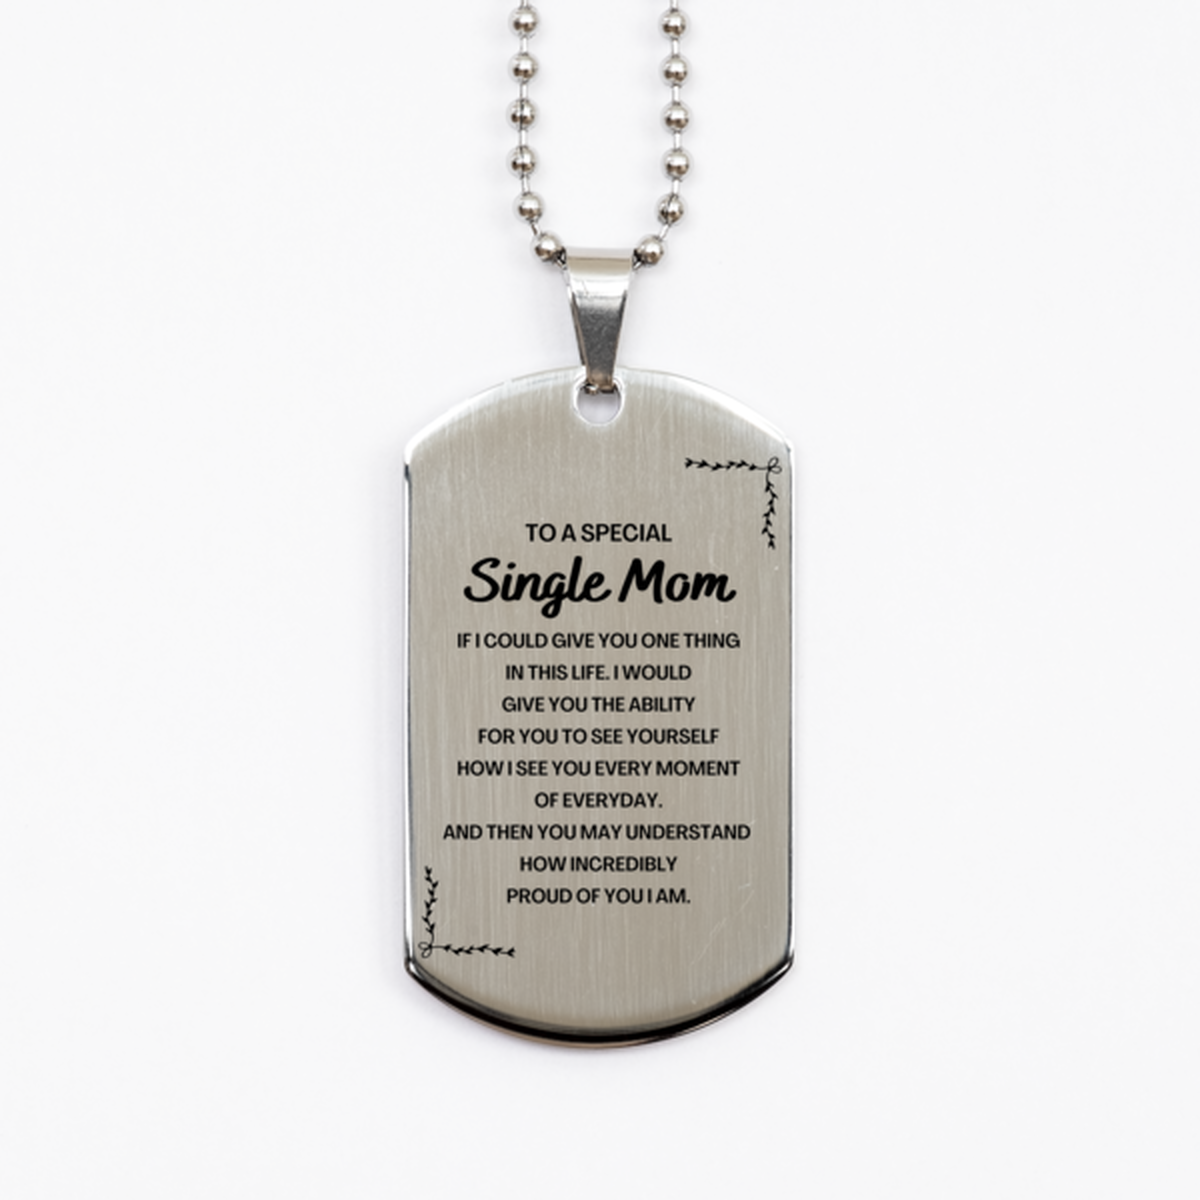 To My Single Mom Silver Dog Tag, Gifts For Single Mom Engraved, Inspirational Gifts for Christmas Birthday, Epic Gifts for Single Mom To A Special Single Mom how incredibly proud of you I am